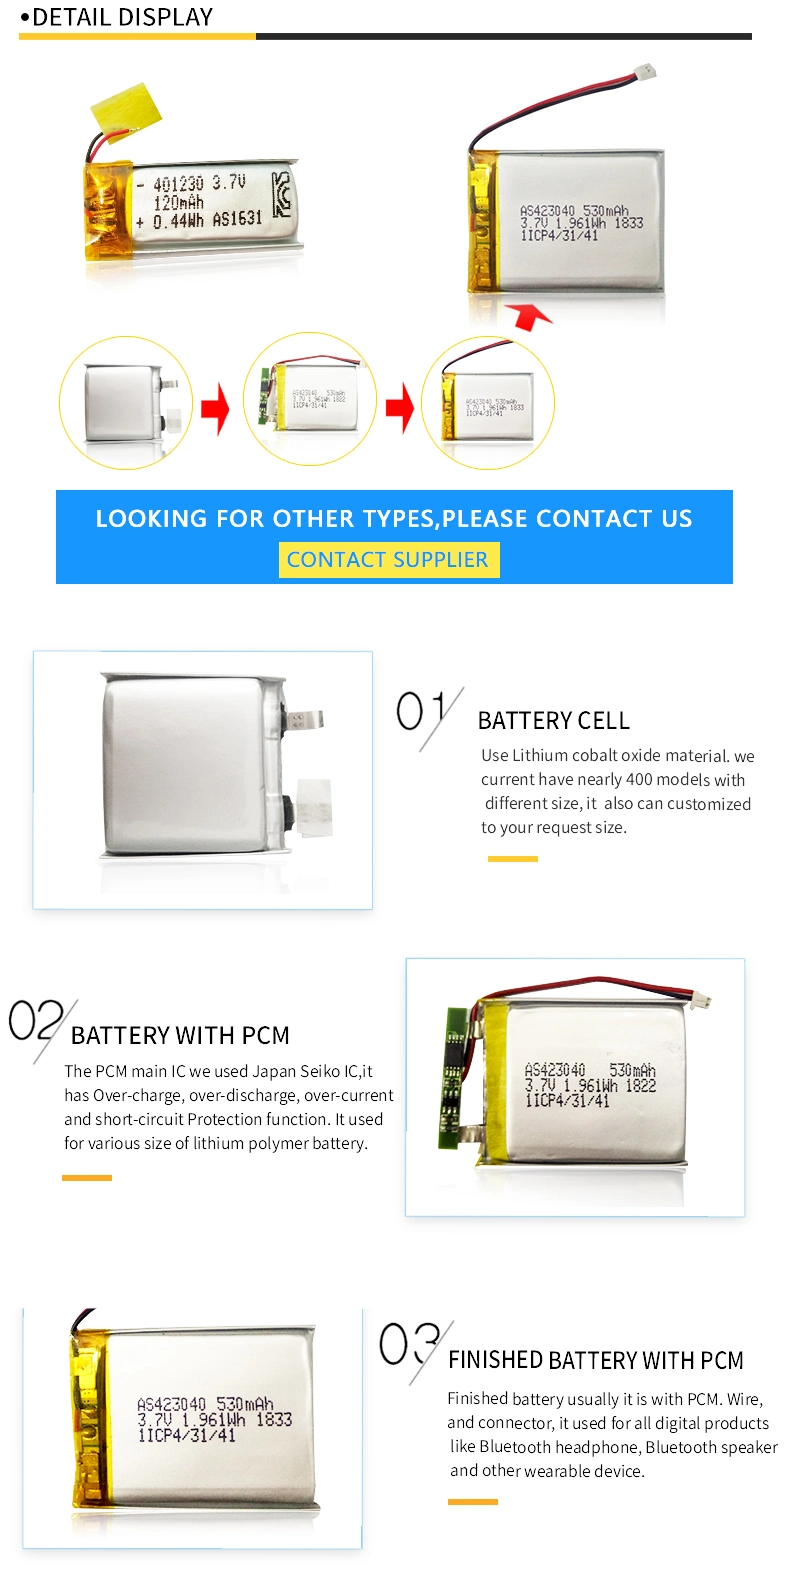 Hottest UL1642, IEC62133, Un38.3 3.7V 603450 1050mAh Lithium Polymer Battery for Wearable Devices